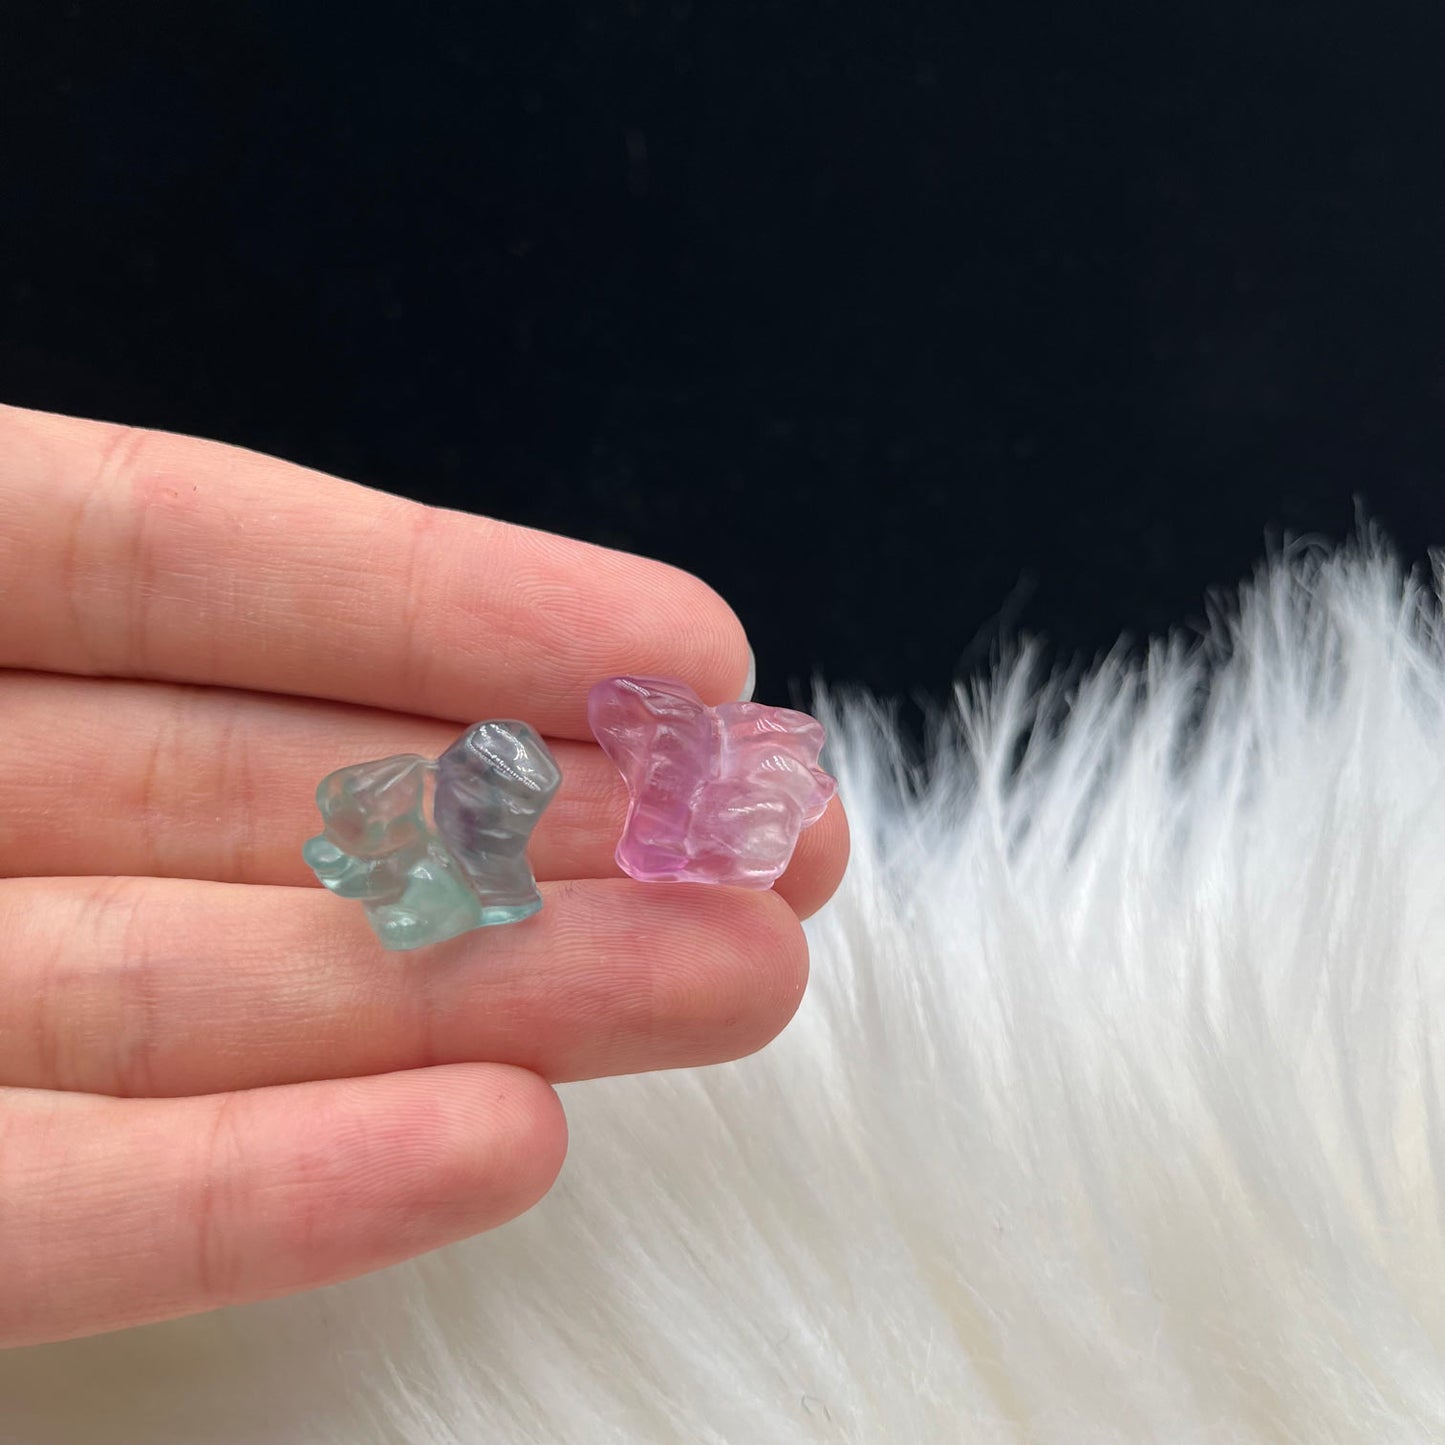 Mini Fluorite Crystal with Body Shark and Squirrel design, size 53